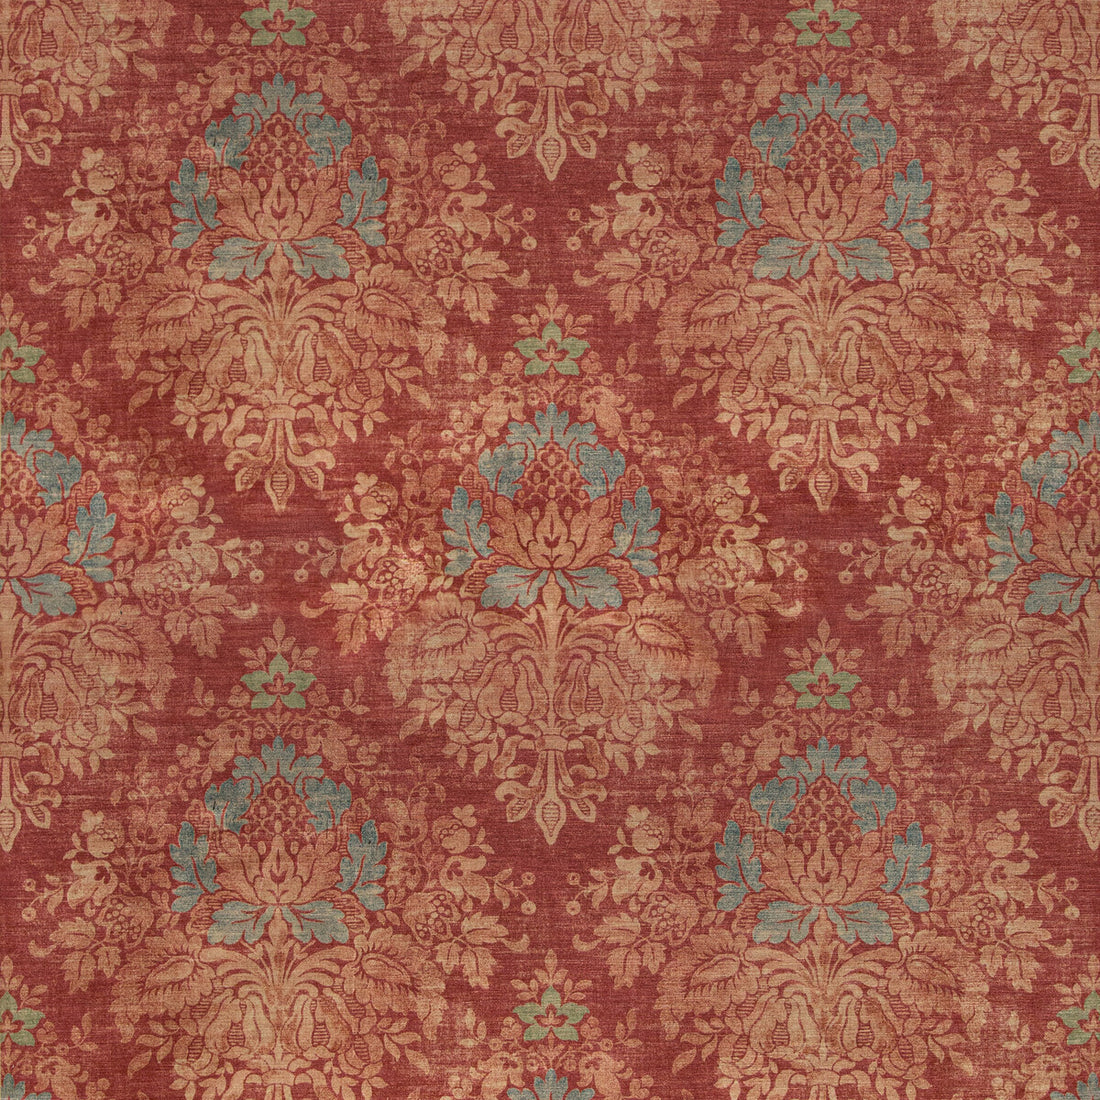 Alma Velvet fabric in spice color - pattern 2019122.19.0 - by Lee Jofa in the Harlington Velvets collection